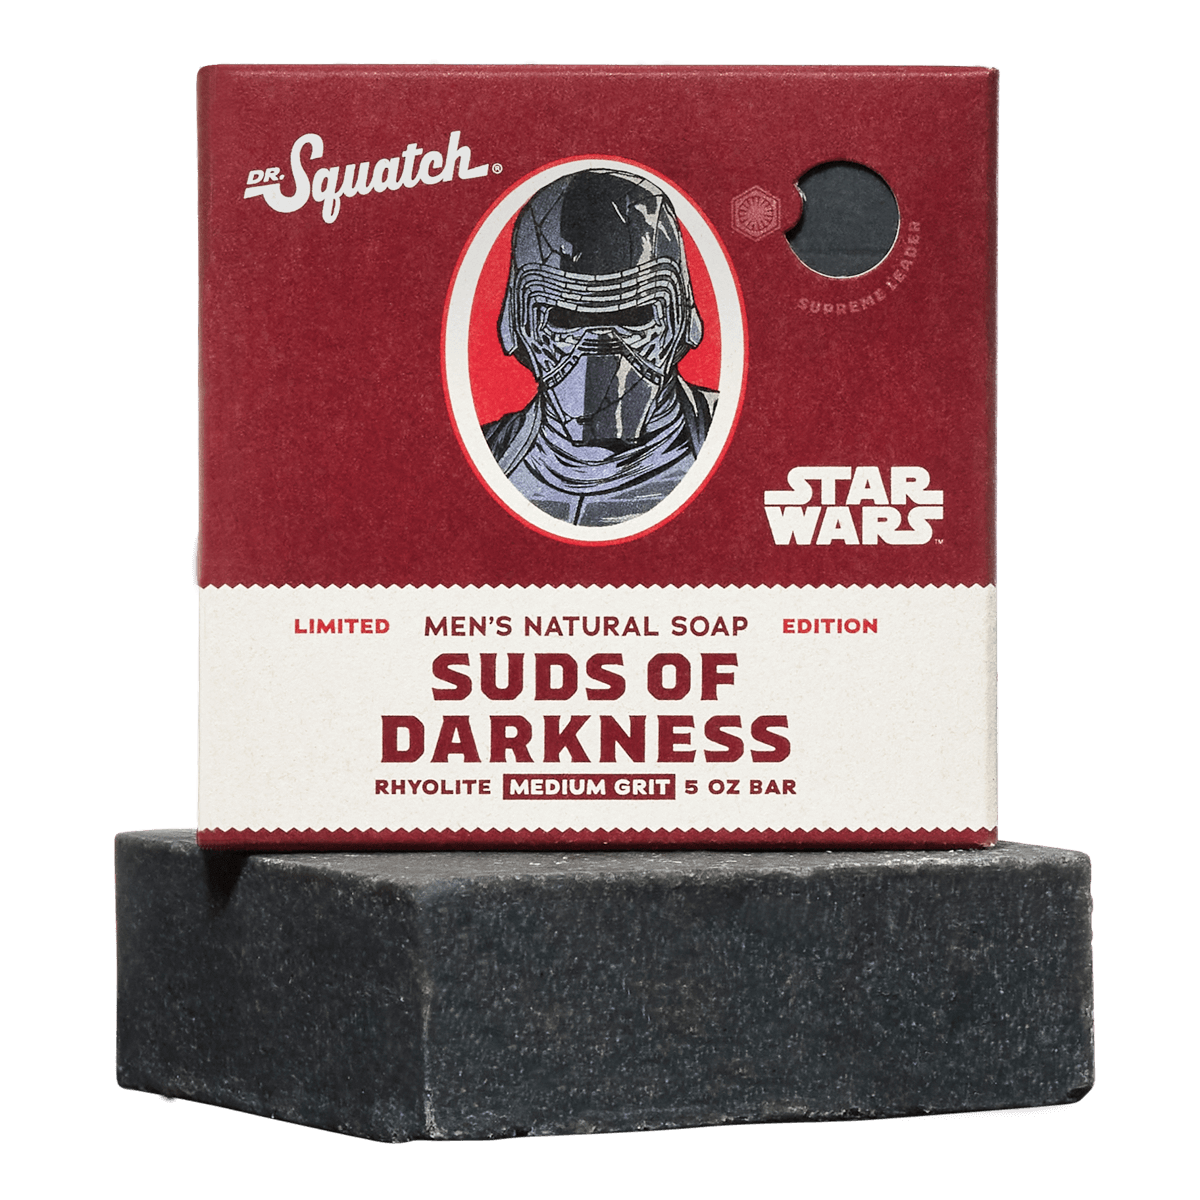 Introducing The Dr. Squatch Soap Star Wars™ Collection - Limited Edition  Soaps In A Special Collectors Box - BroBible